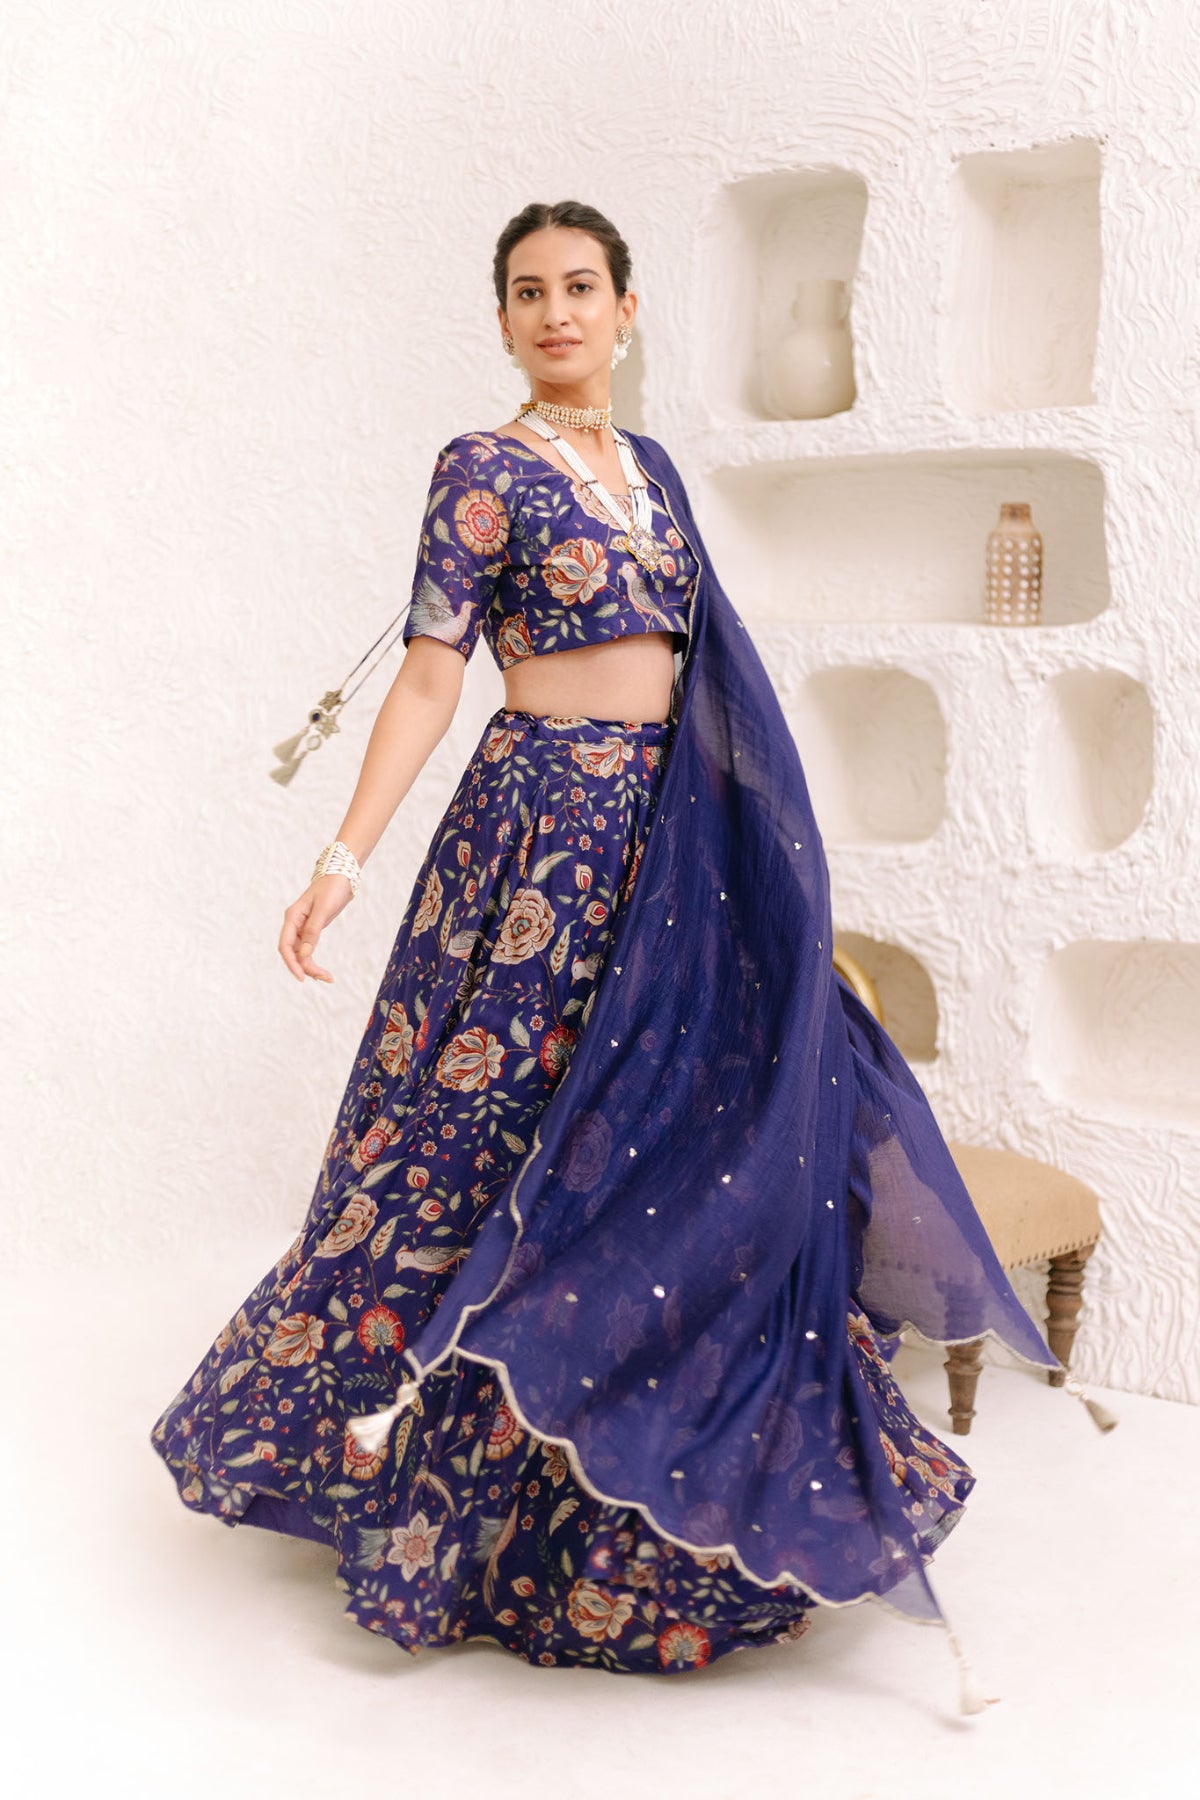 Moroccon Blue Floral print Lehenga with Floral print Blouse and Dupatta - set of 3